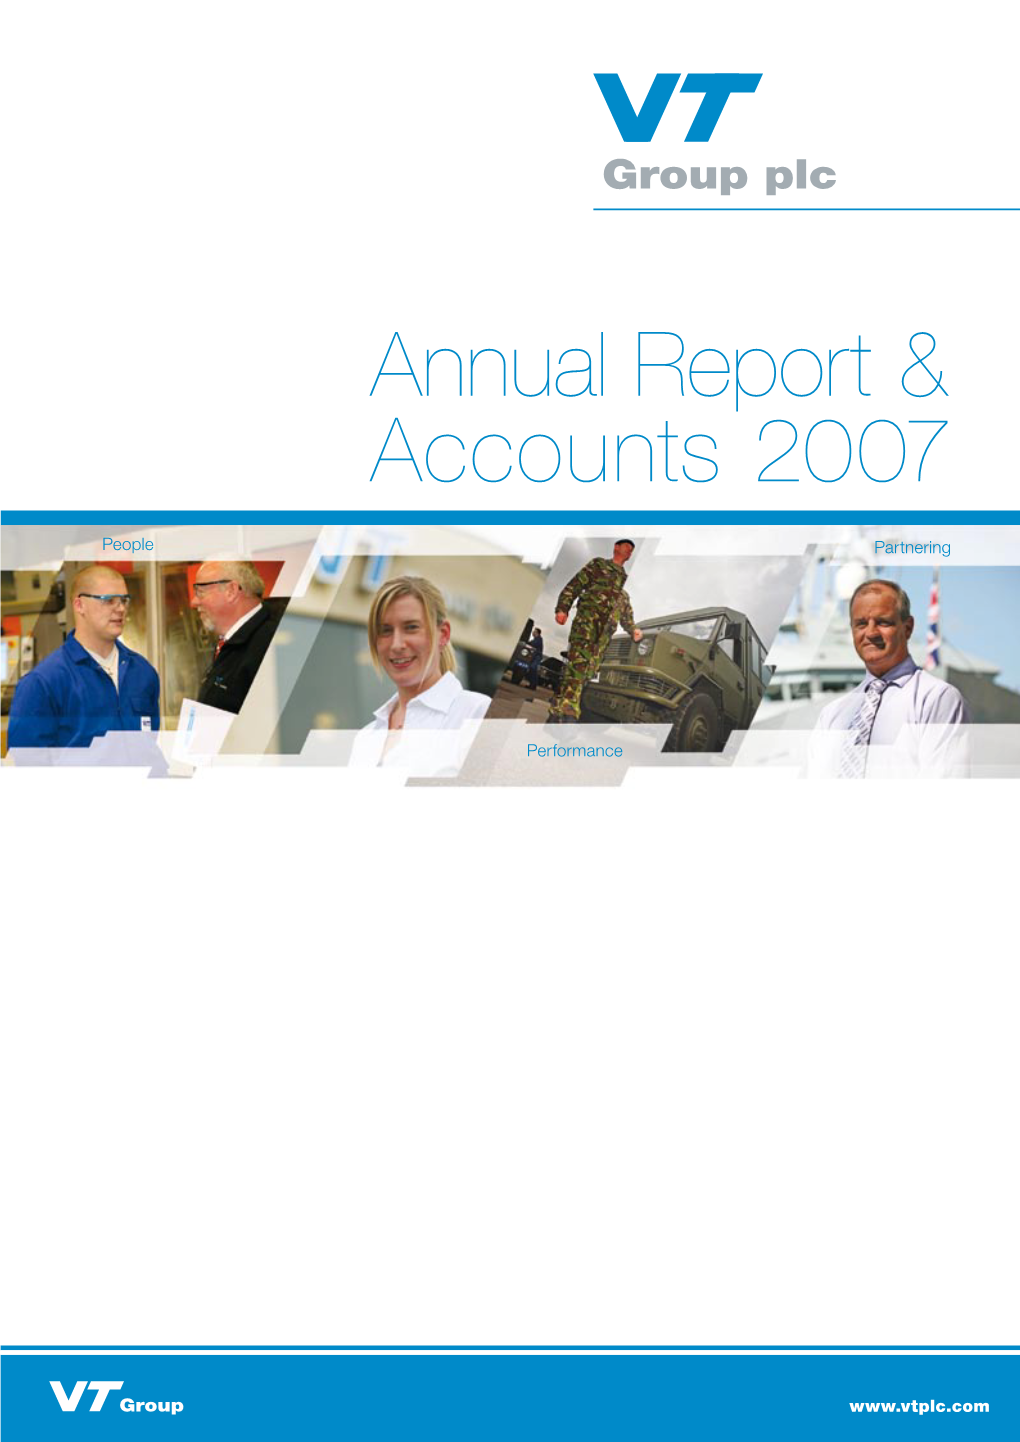 VT Group Annual Report & Accounts 2007